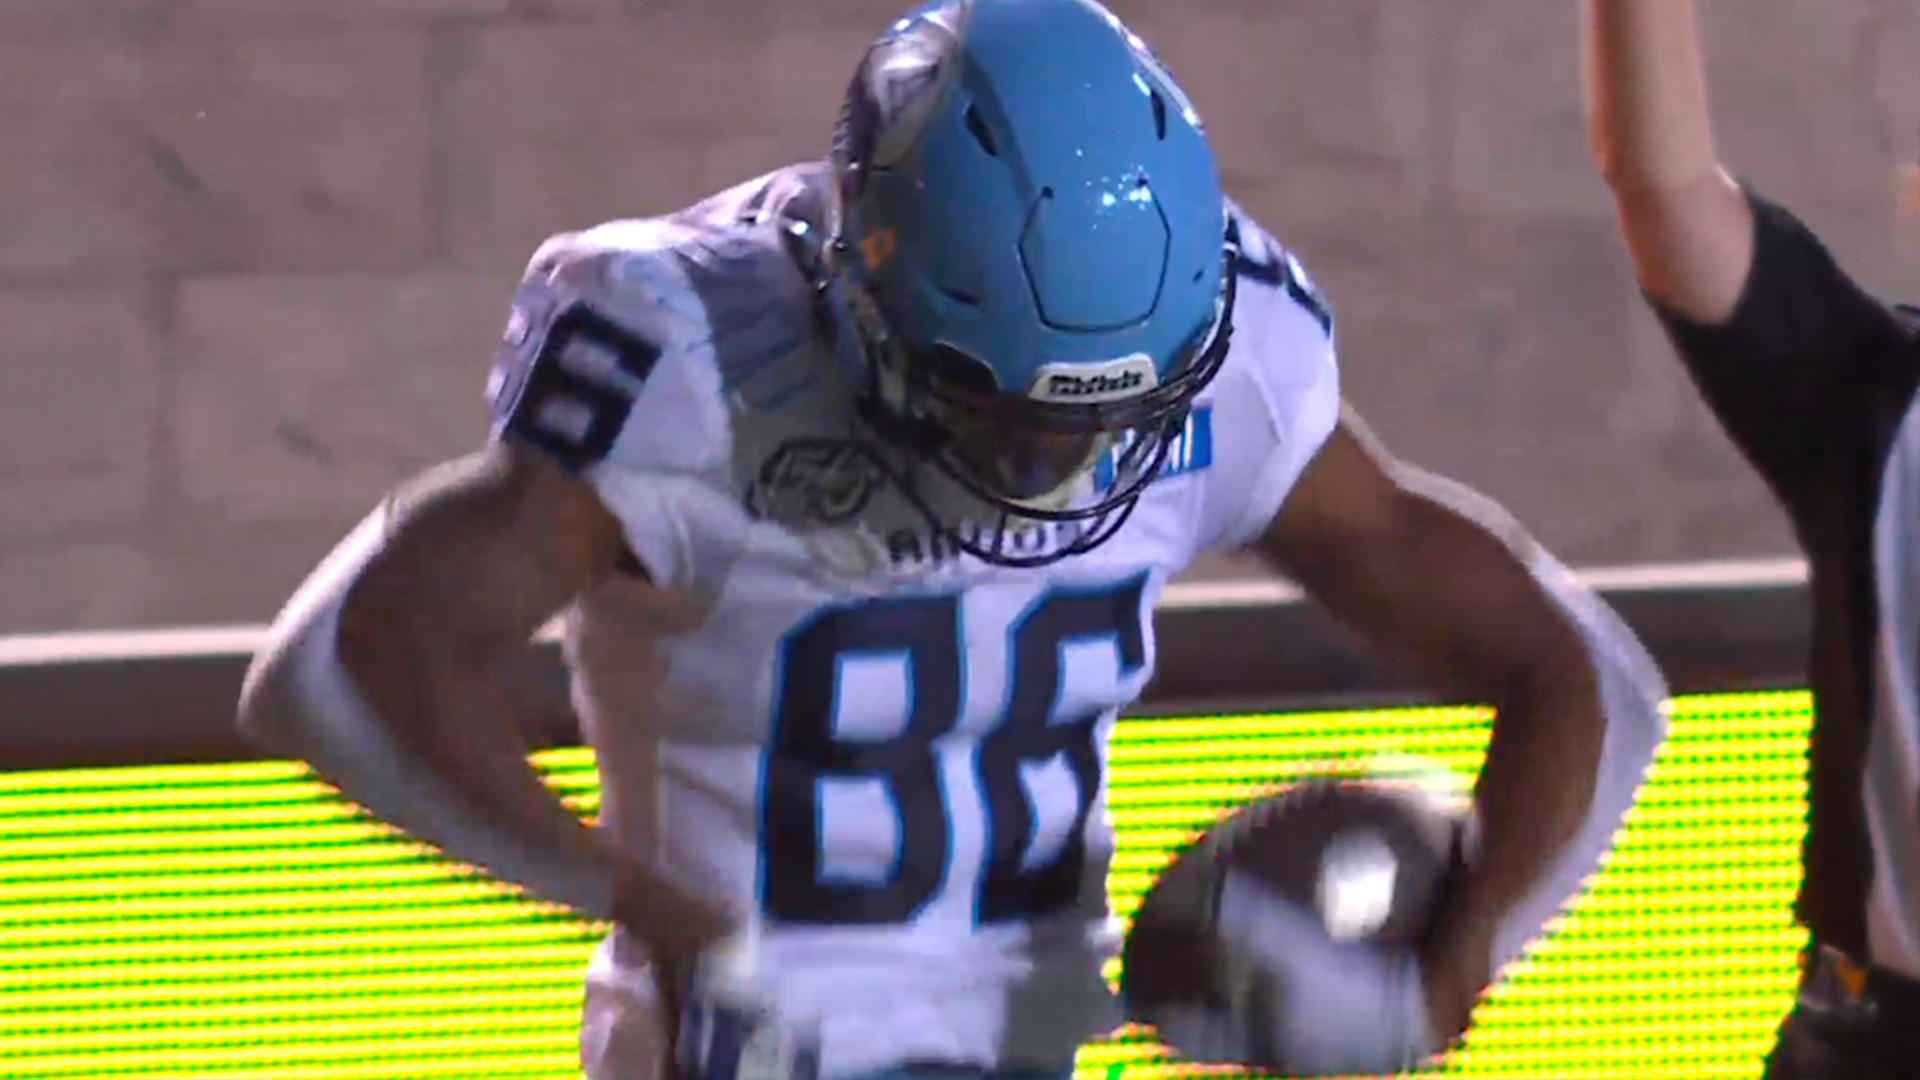 Coxie makes spectacular one handed grab for the score - CFL.ca